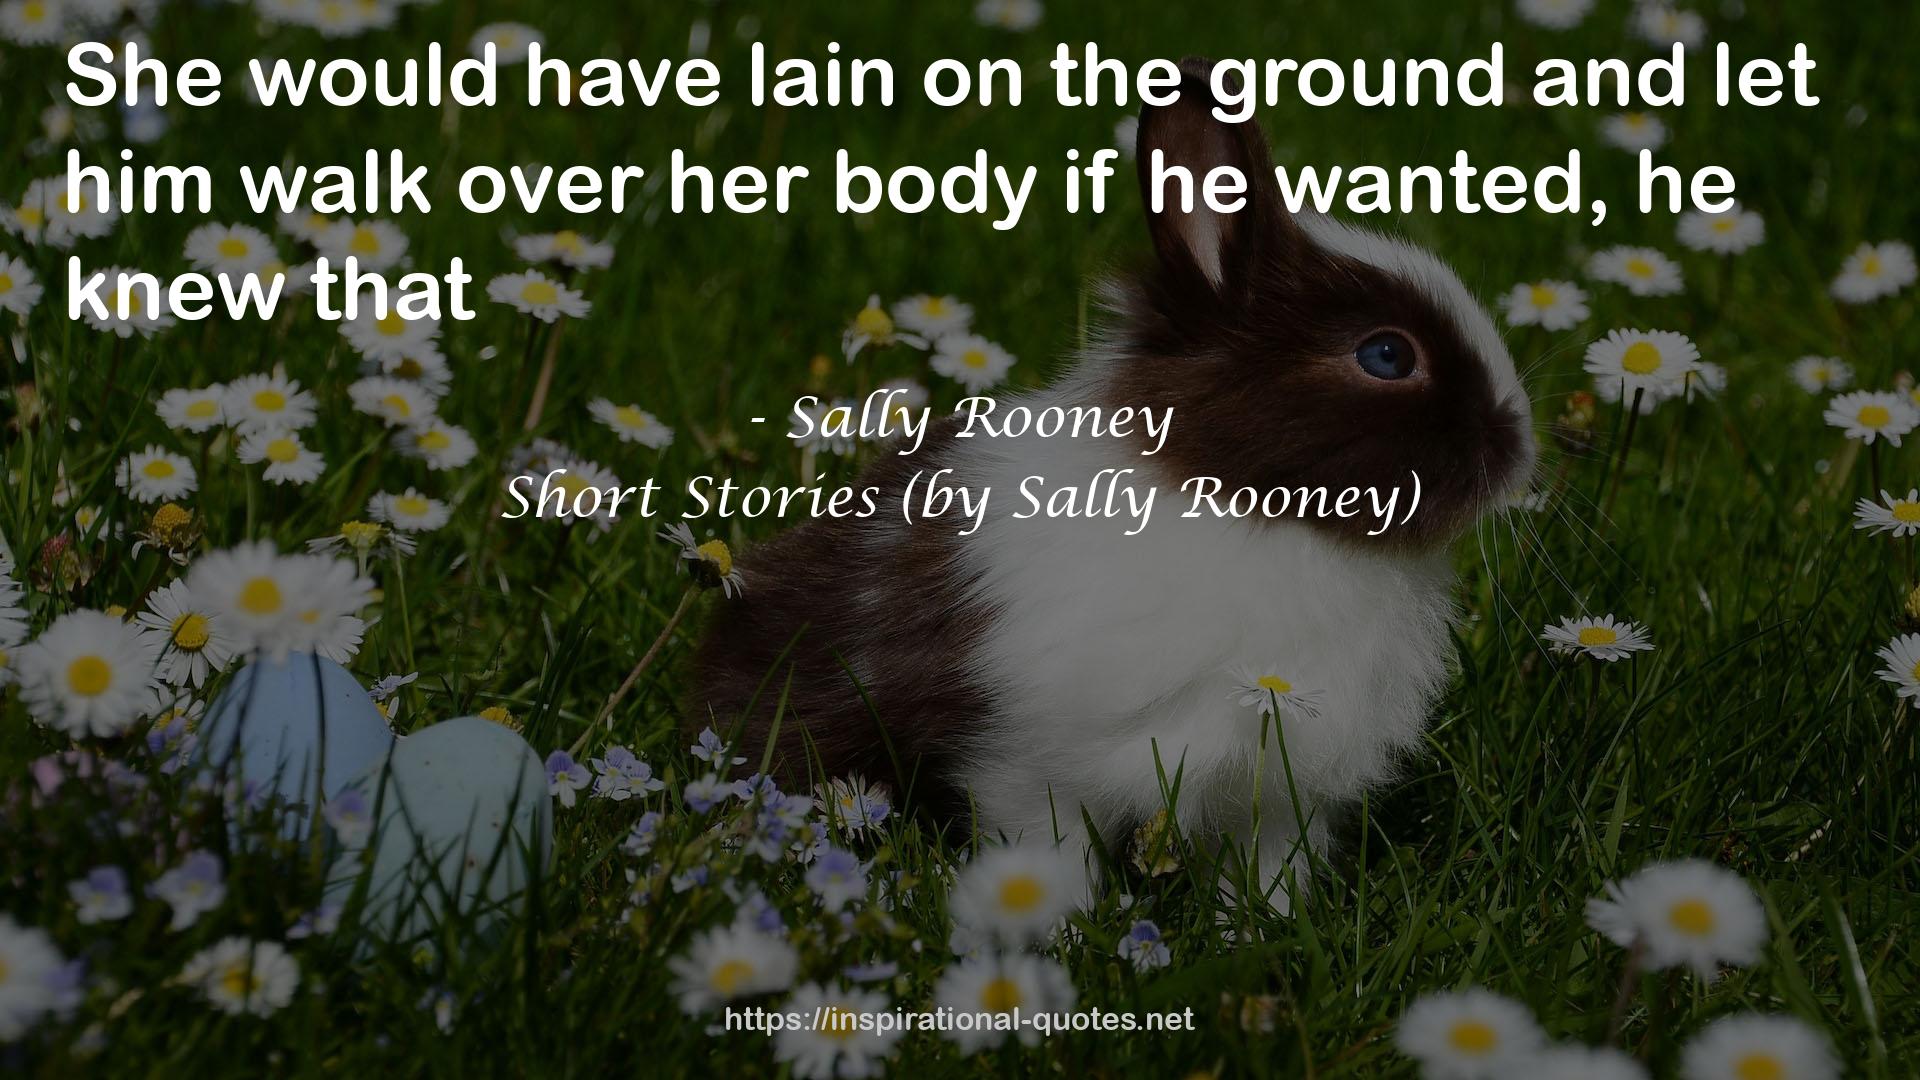 Short Stories (by Sally Rooney) QUOTES